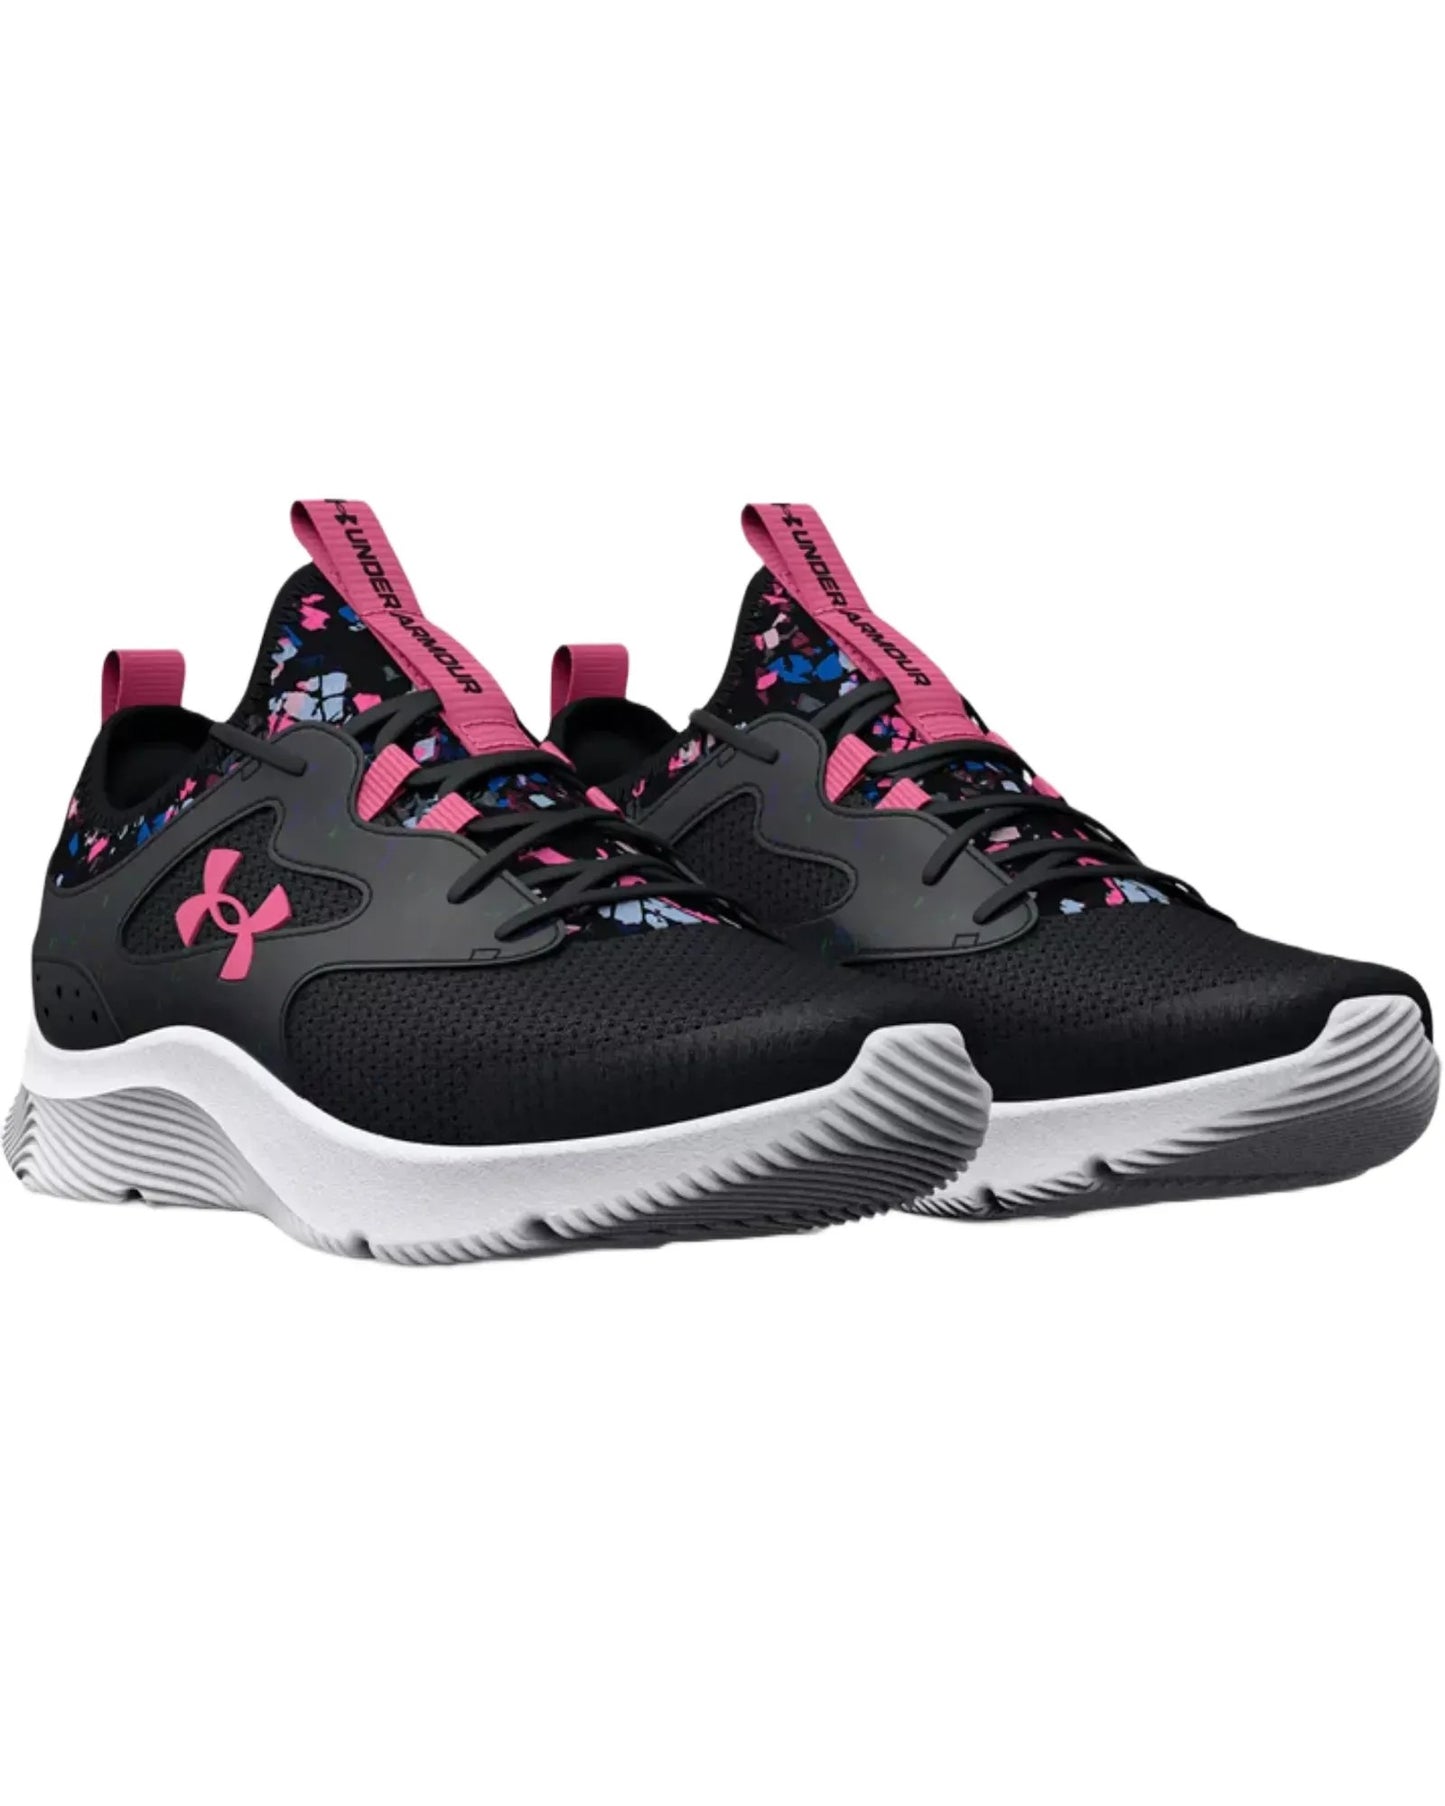 Chaussures de course GGS Infinity 2.0 - Under Armour